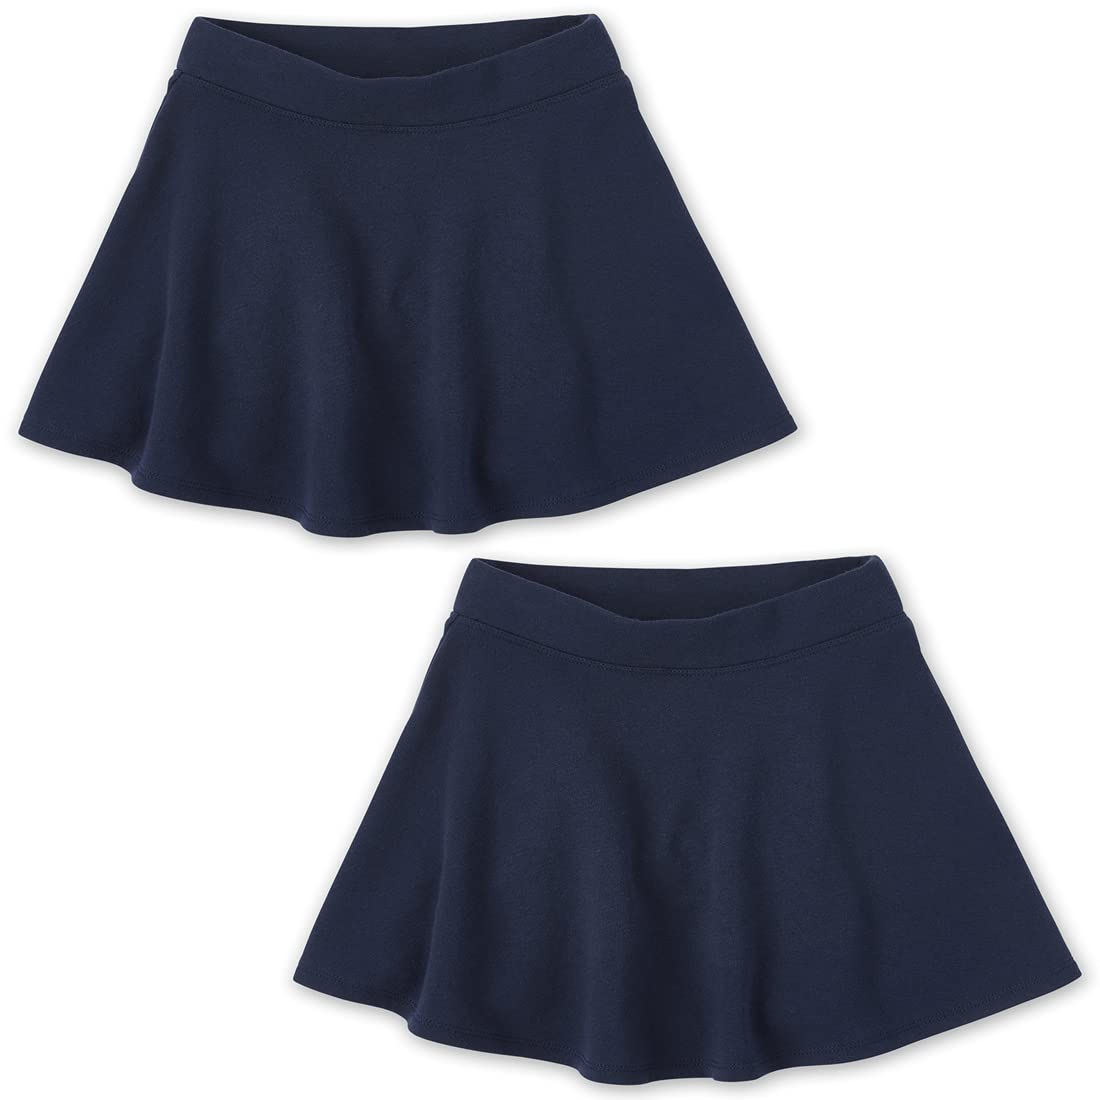 The Children's Place Girls' 2 Pack Active French Terry Skort